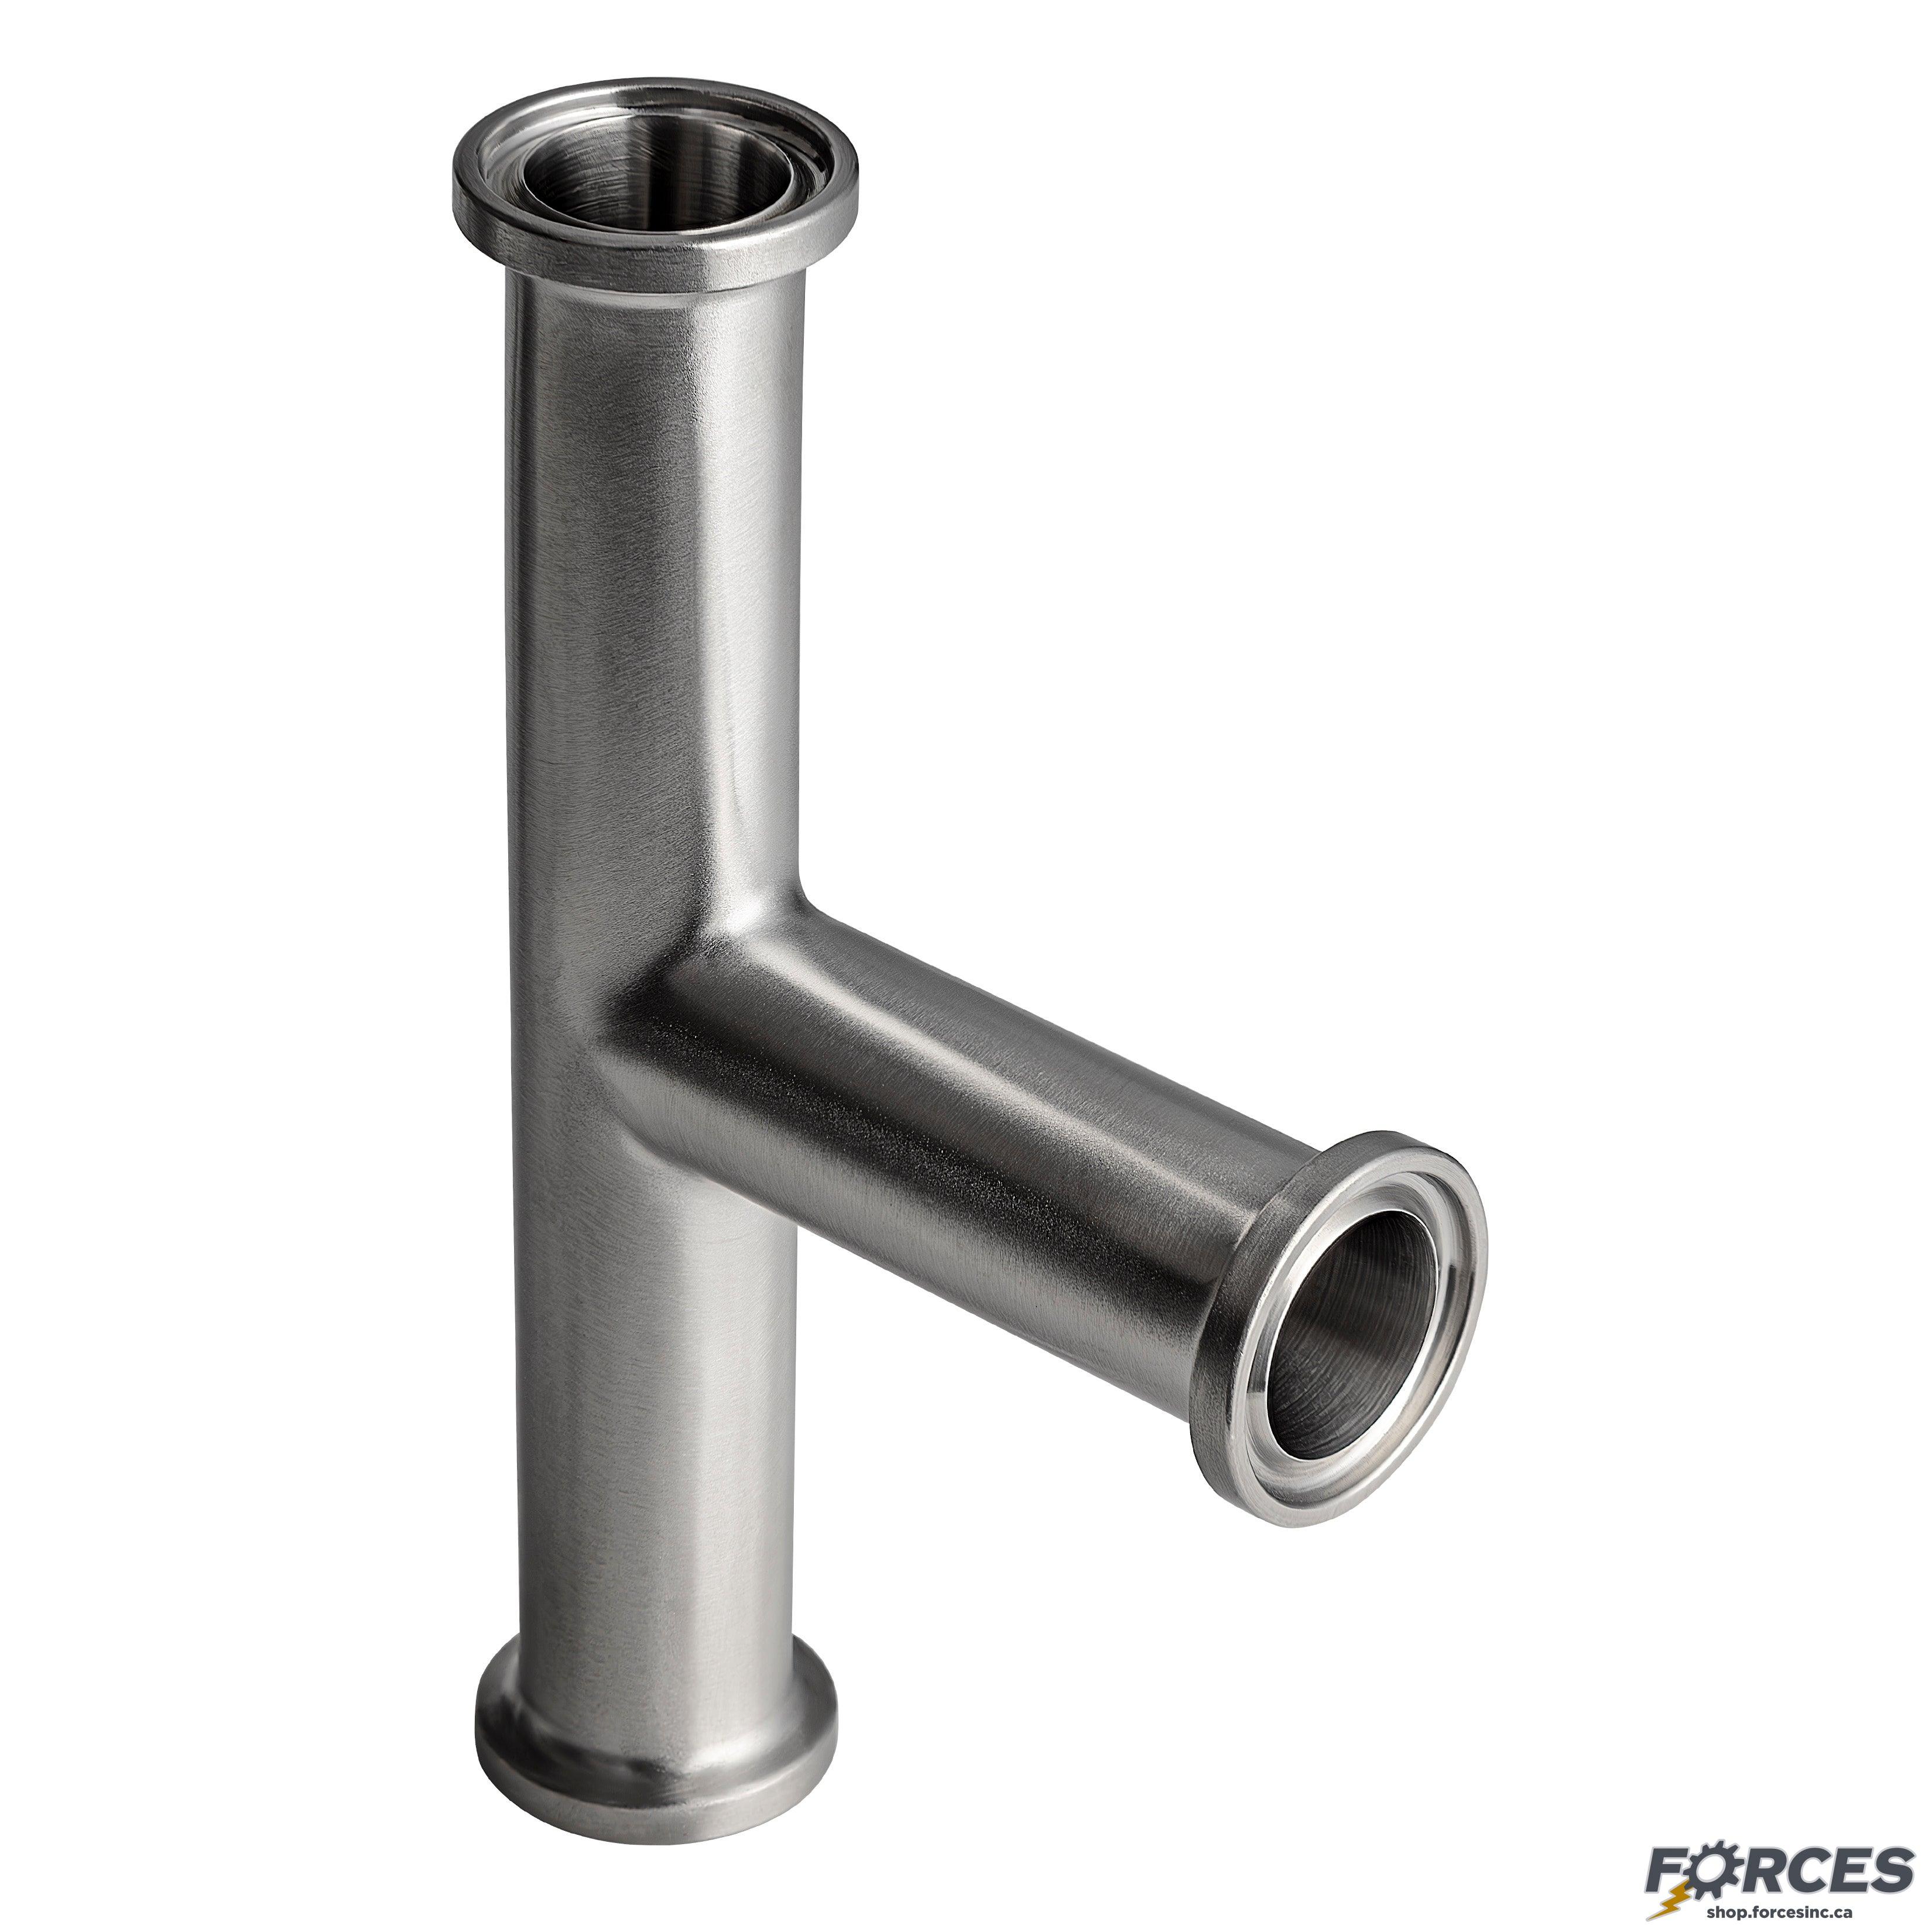 2" Tri-Clamp Tee - Stainless Steel 304 - Forces Inc